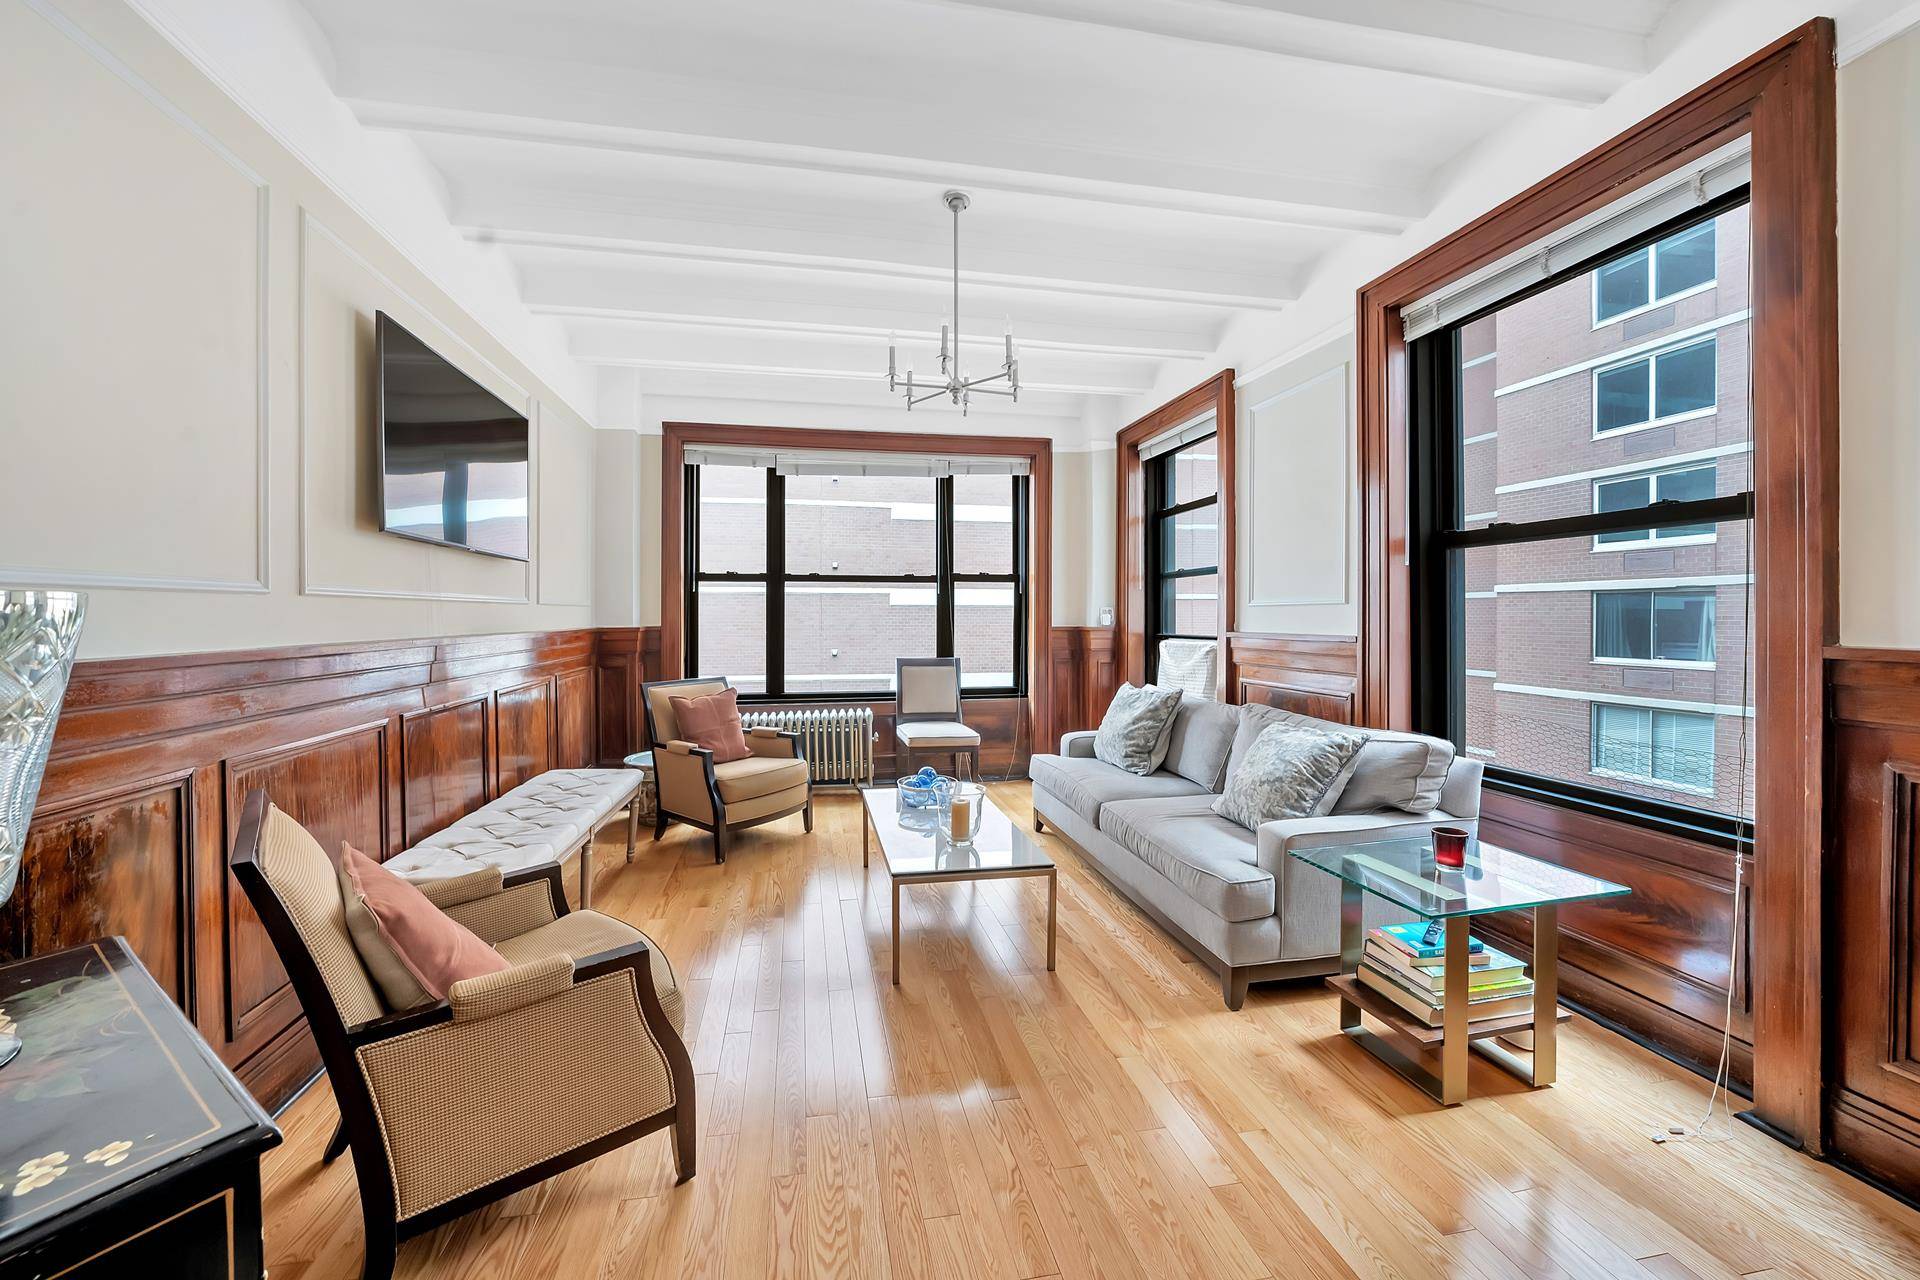 Quiet, bright corner pre war condominium 1, 138 square feet in prime Upper West Side location offers richly detailed space with high ceilings and gracious layout.